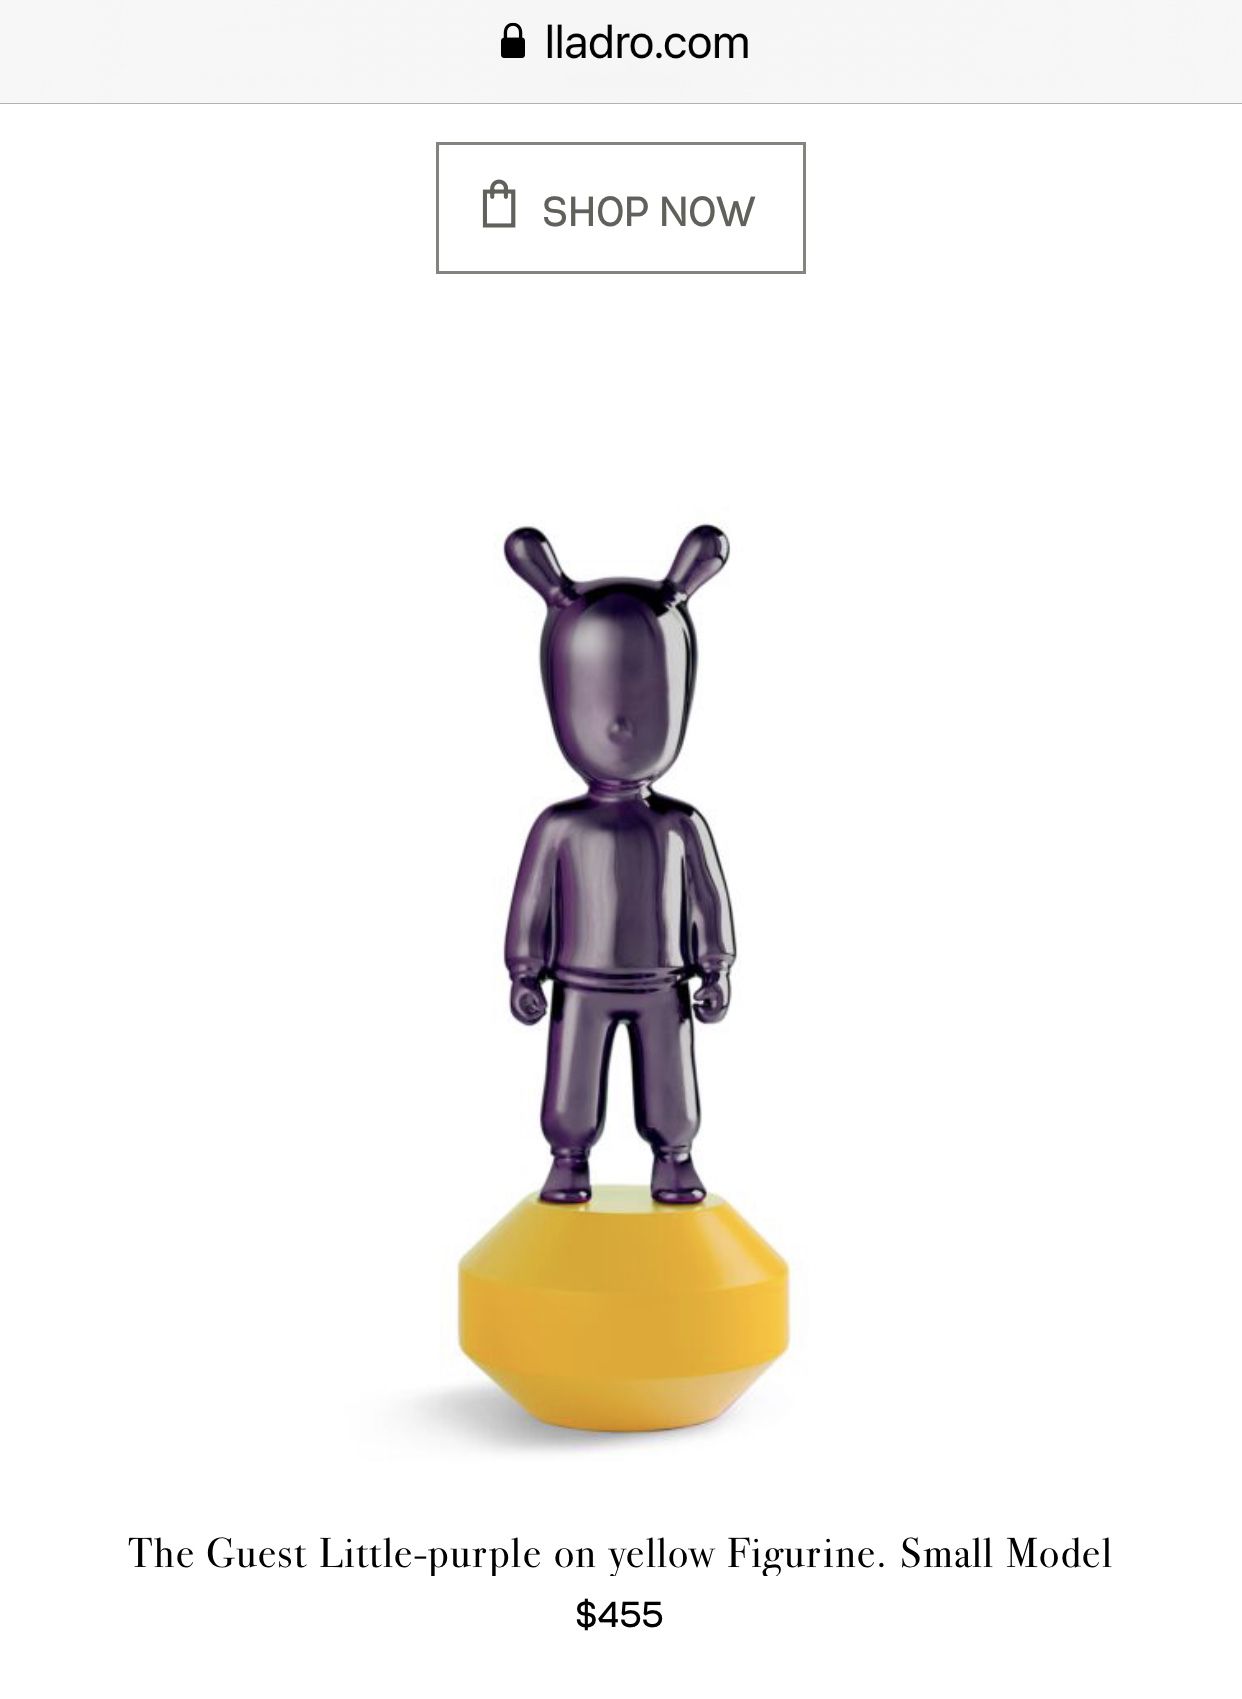 The Guest Little Purple-yellow Figurine From Lladro